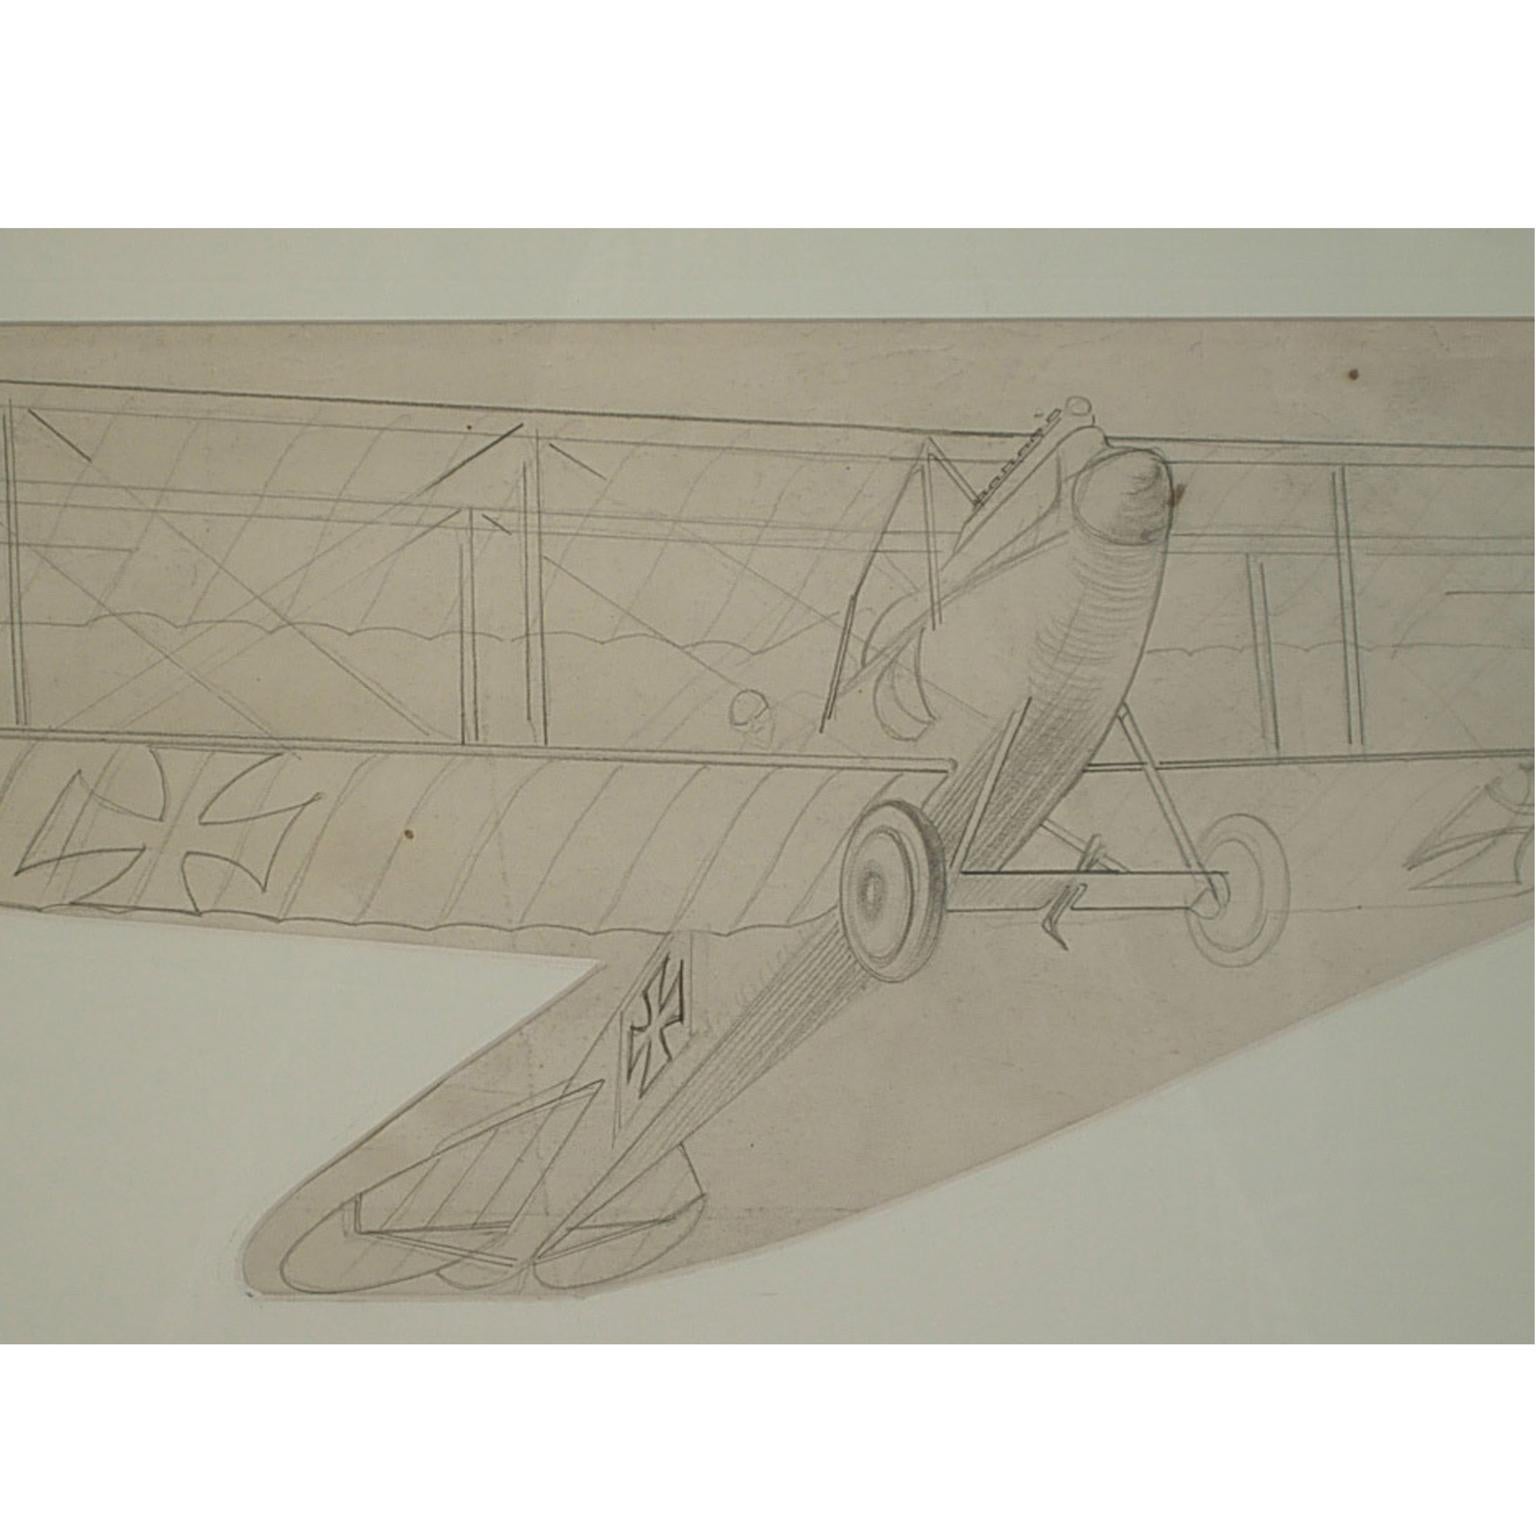 Pencil drawing depicting a two-seat biplane airplane for reconnaissance Albatros C III produced in 1916, by Riccardo Cavigioli. Measure with frame cm 53.5 x 31.4 - inches 21 x 13.

Riccardo Cavigioli was born in Milan on 10th November 1895 and he